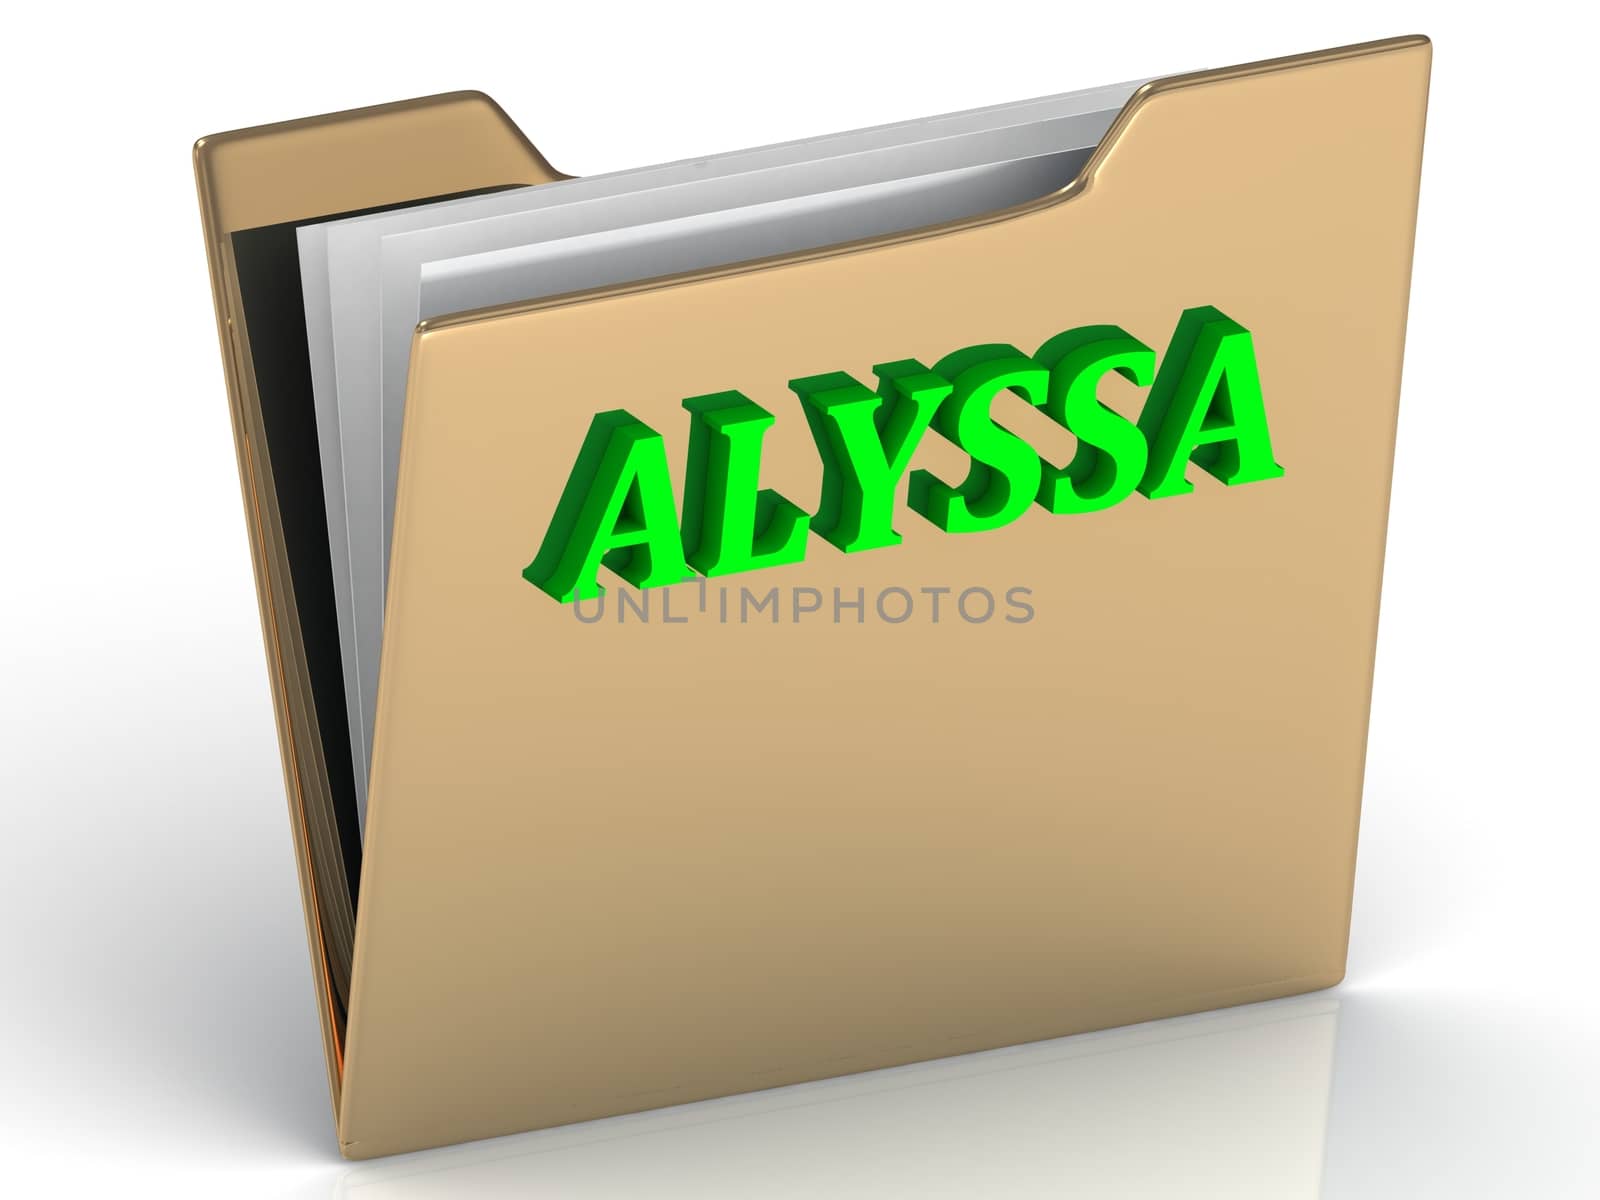 ALYSSA- bright green letters on gold paperwork folder on a white background